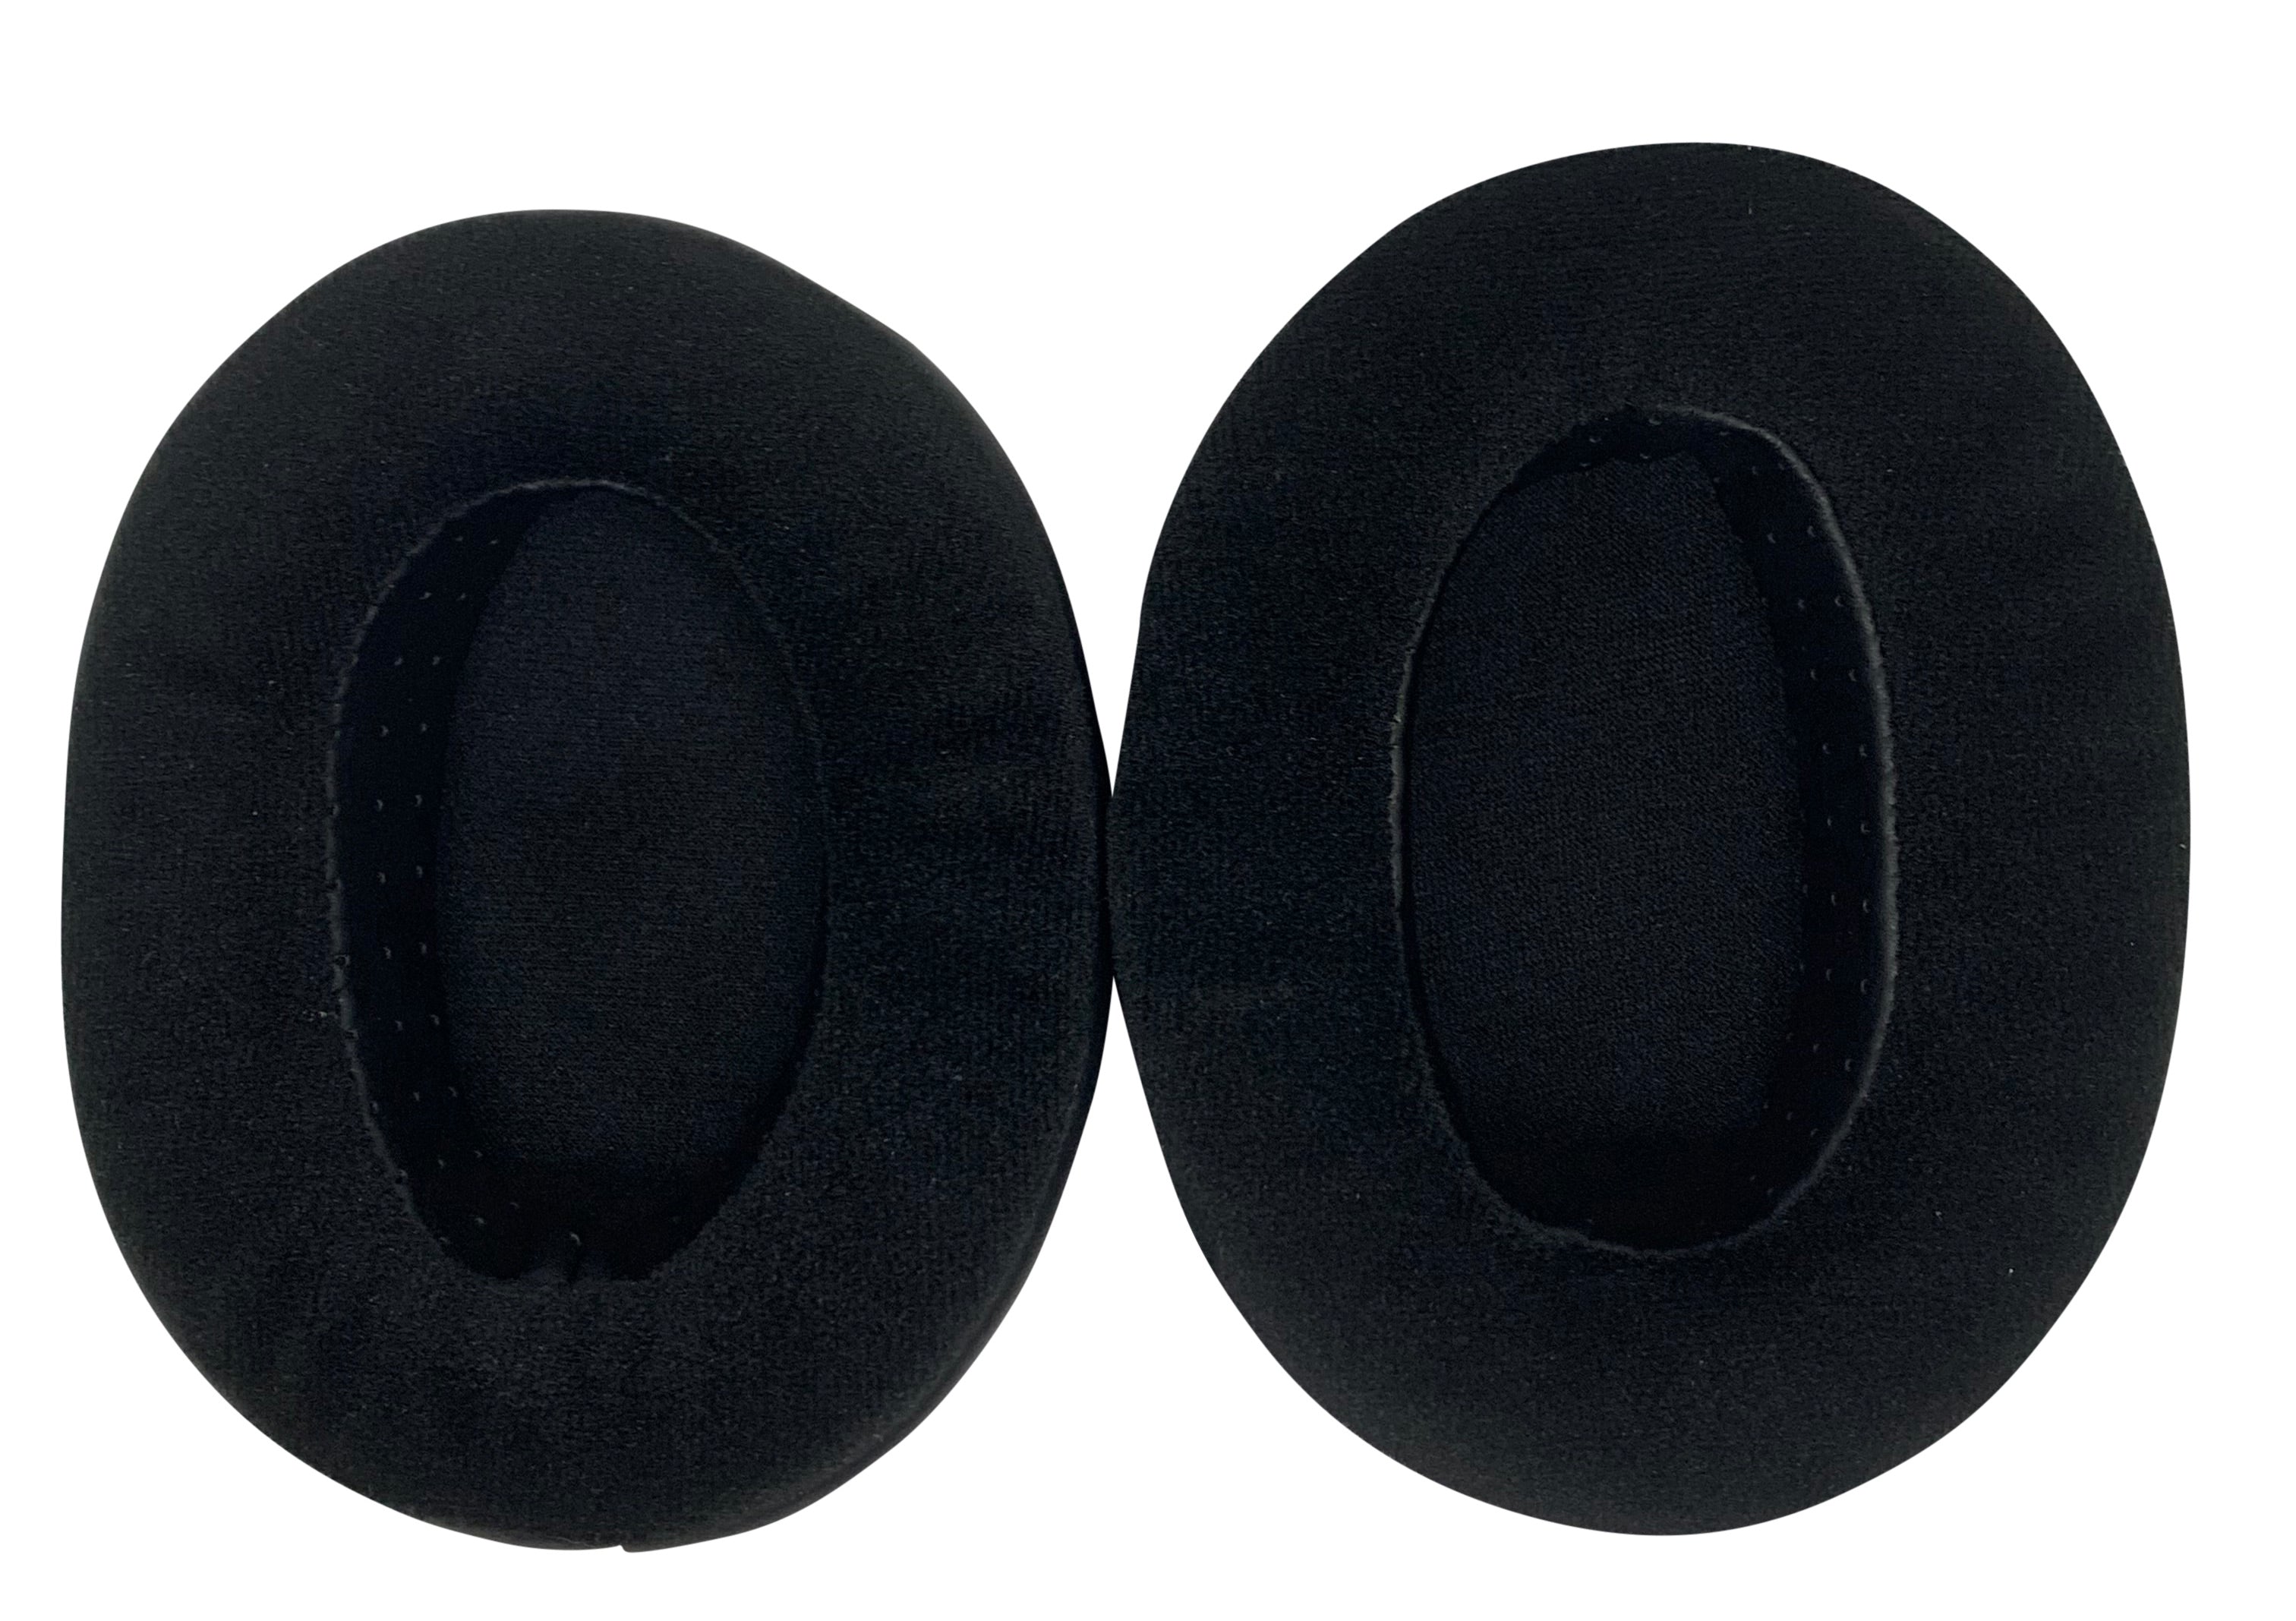 CentralSound Premium XL Replacement Ear Pads for Turtle Beach Gaming Headsets - CentralSound